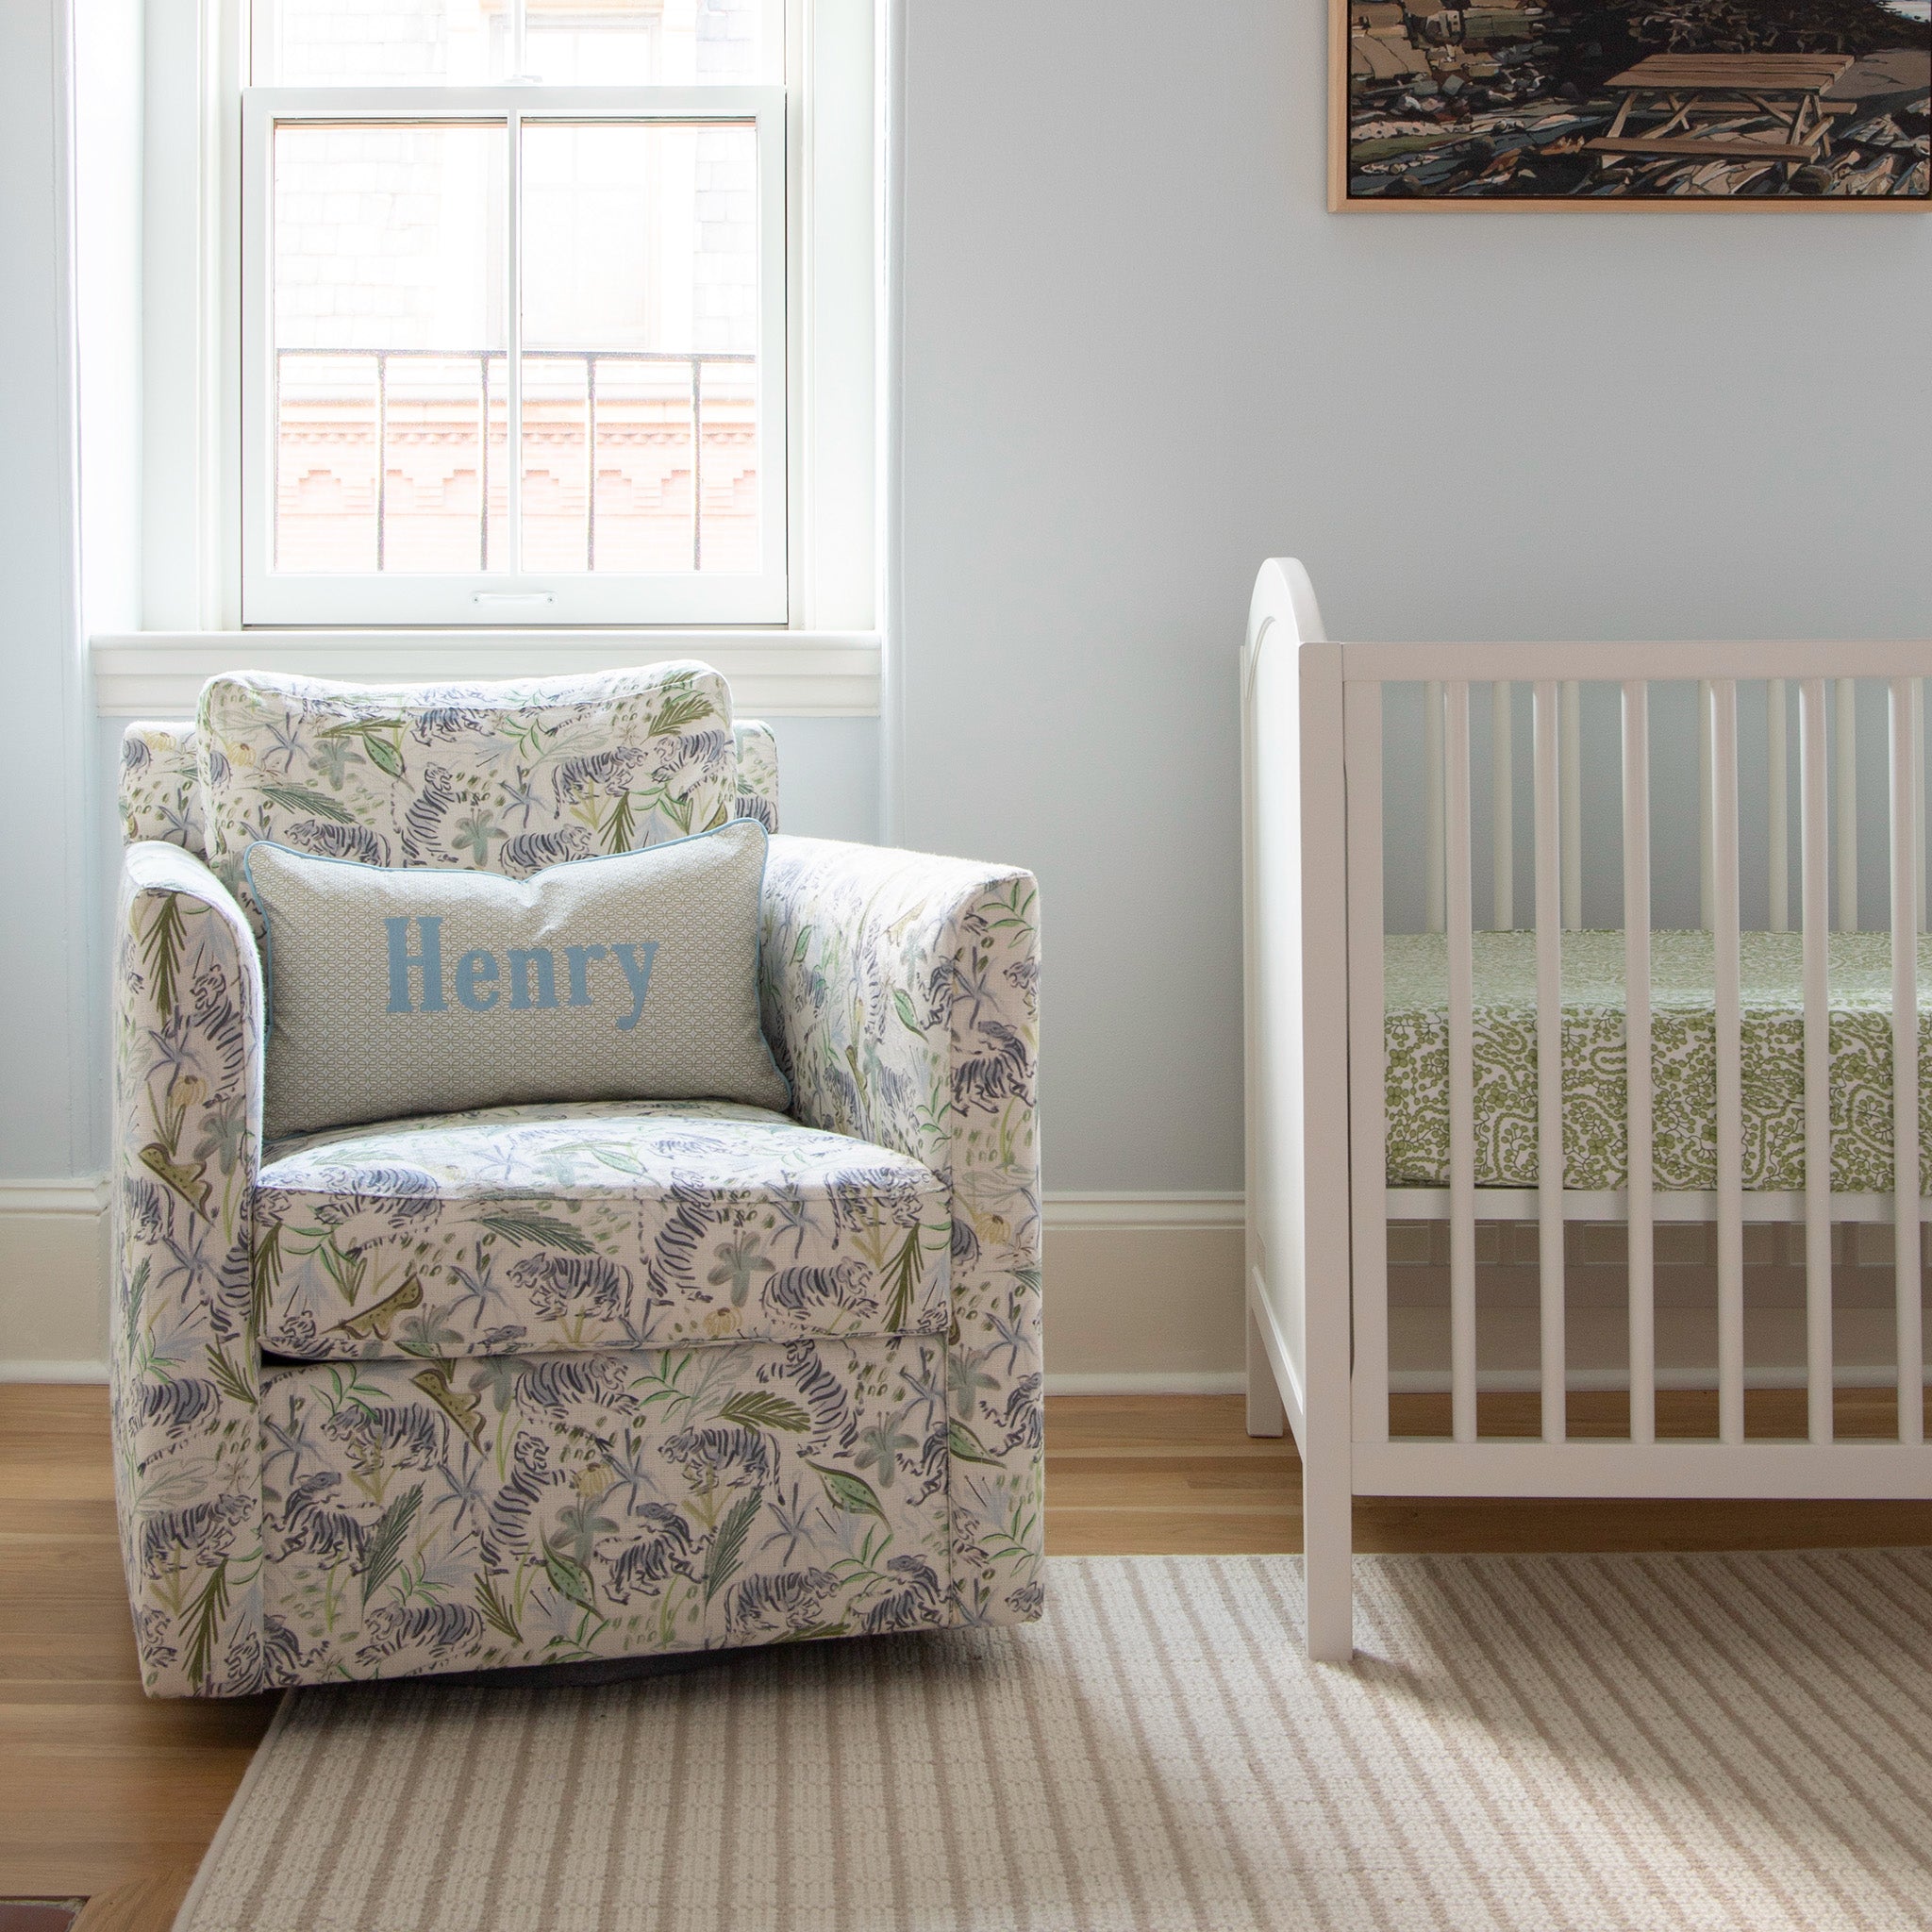 Nursery room corner styled with Moss Green Geometric Printed Monogrammed Pillow on Green Tiger Printed Linen Couch next to white crib